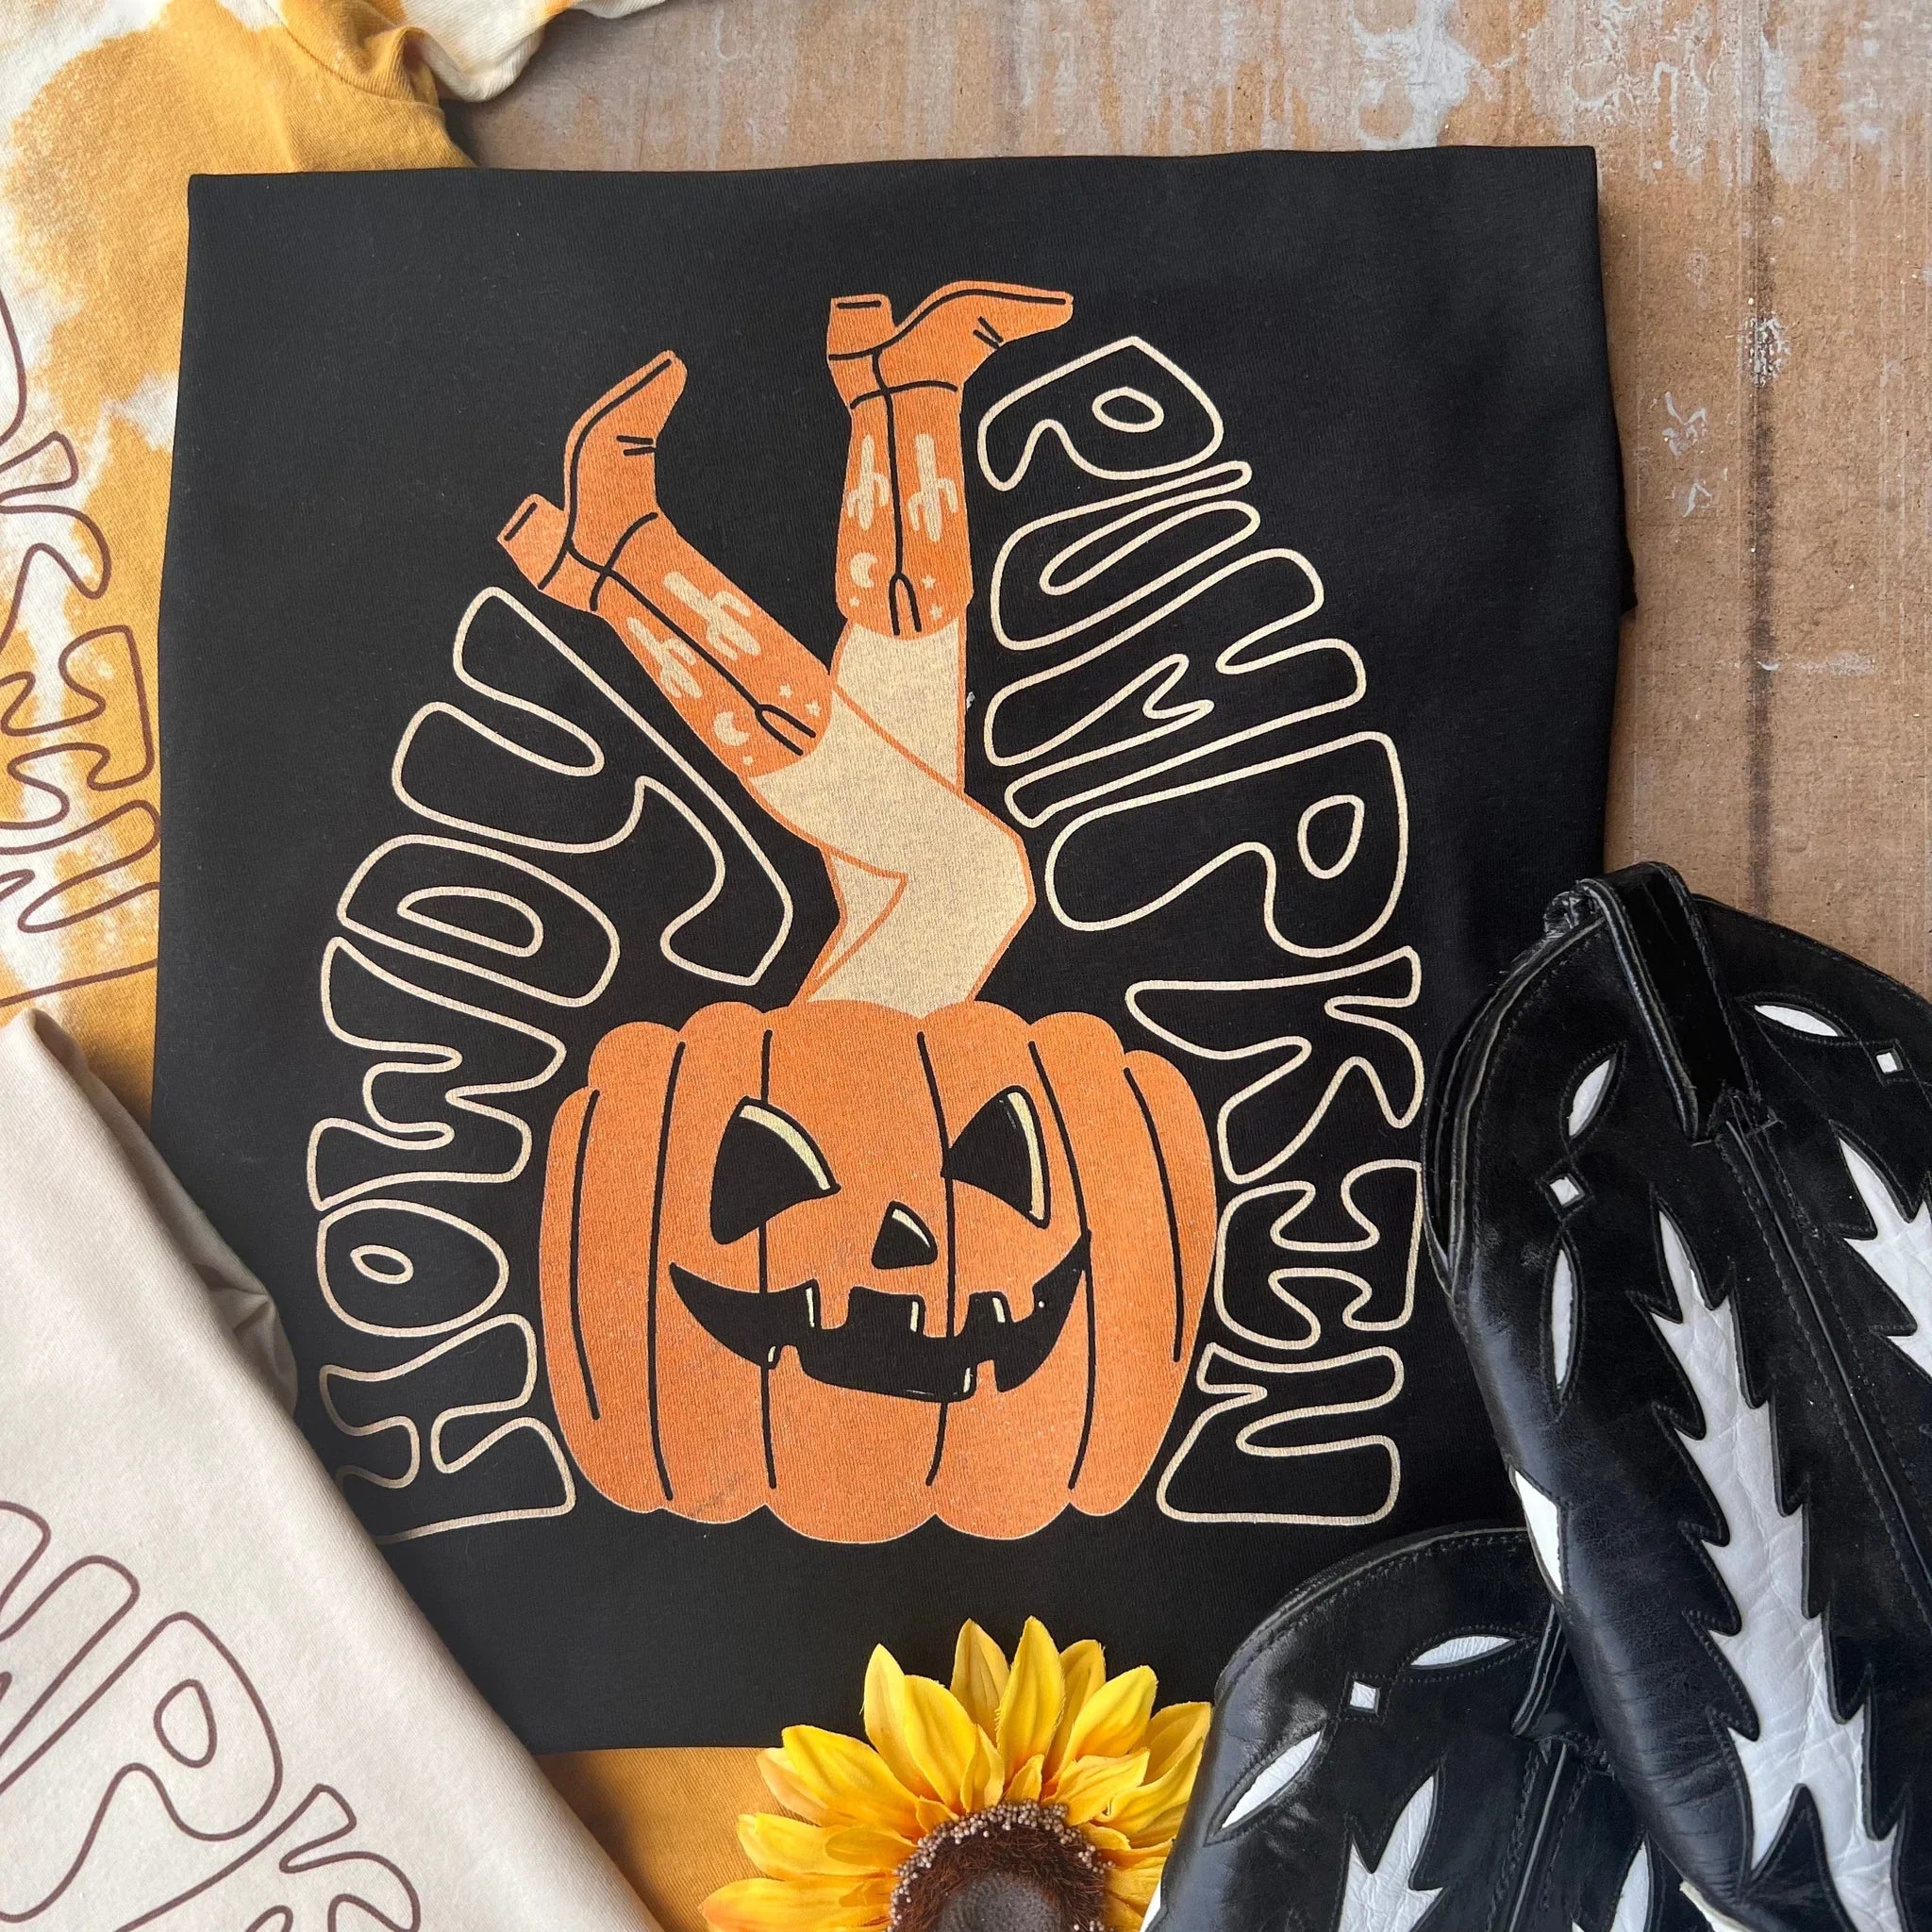 This is a black tee with white bubble letters that say howdy pumpkin and surround an orange pumpkin with cowgirl legs sticking out. It is pictured with black and white cowgirl boots and two other tees that are mostly cropped out of the photo.